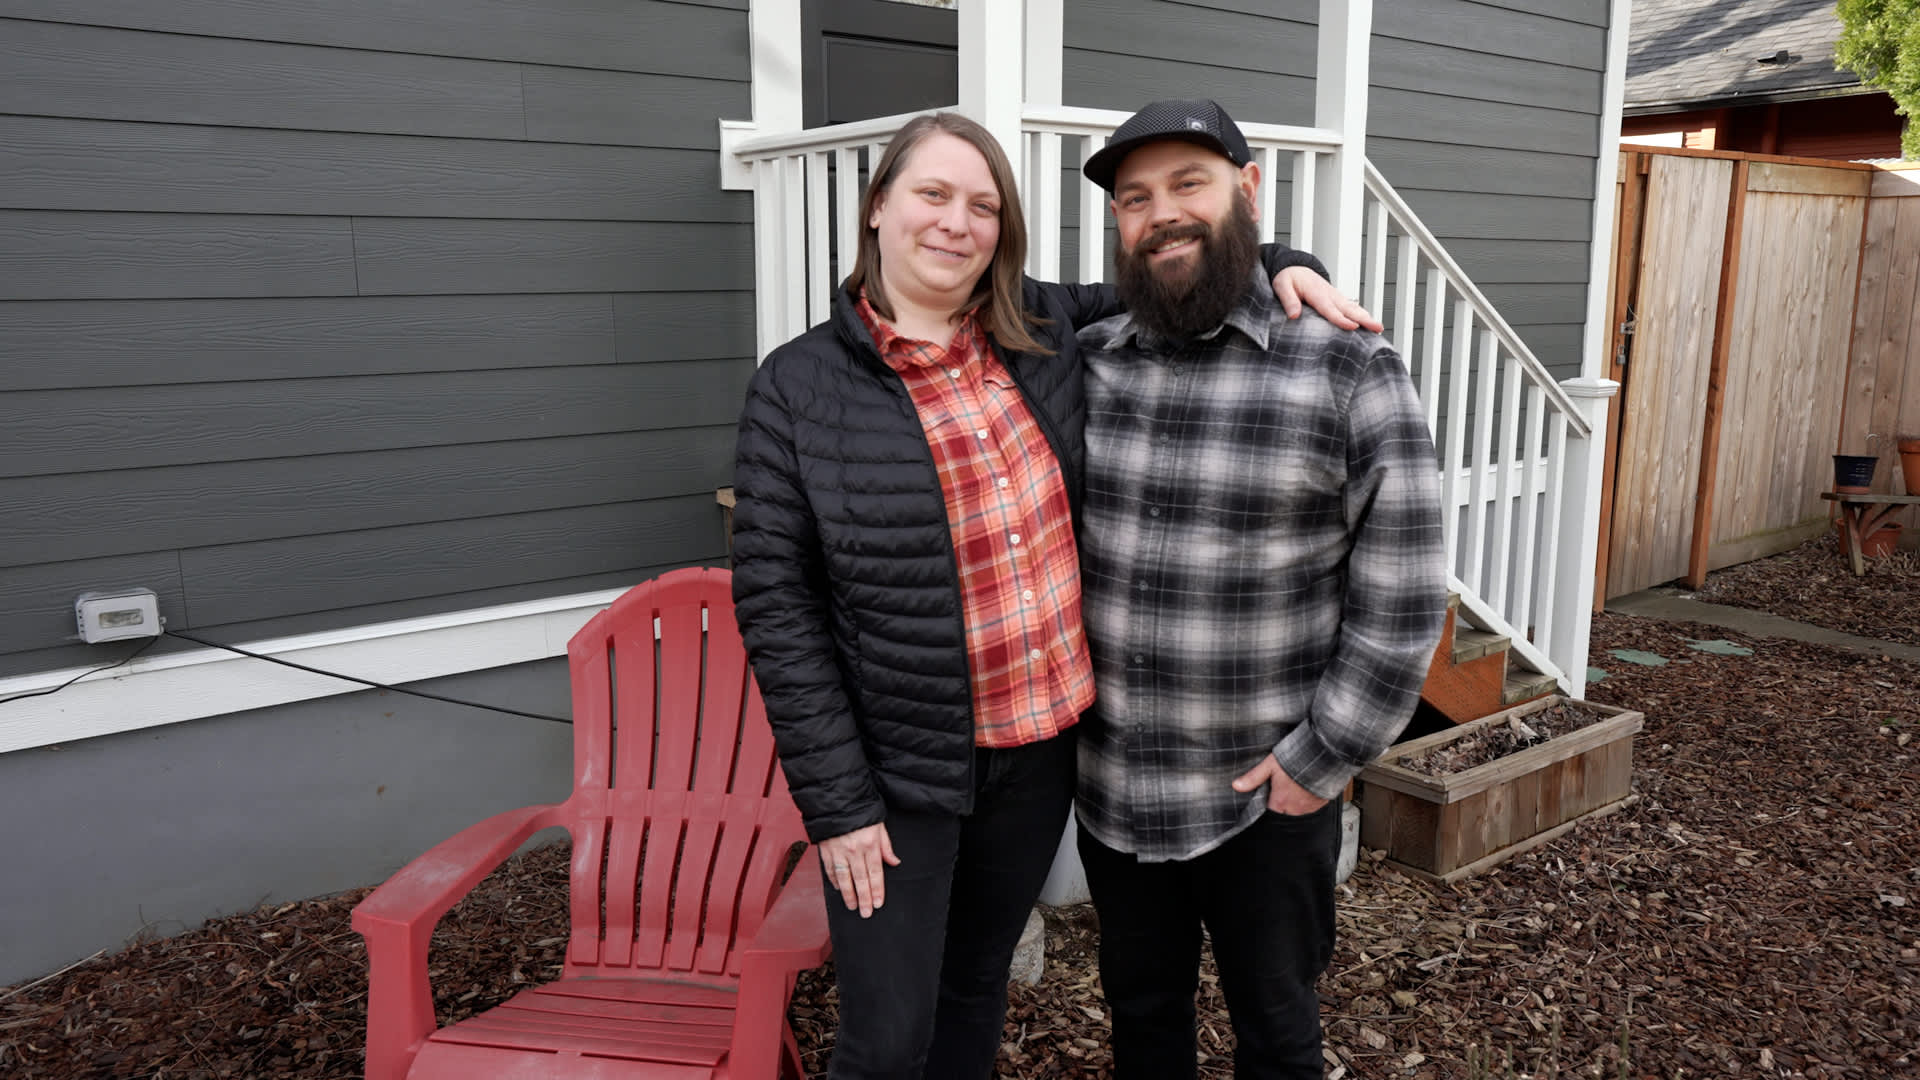 This couple spent ,000 to convert their home to ‘net zero’